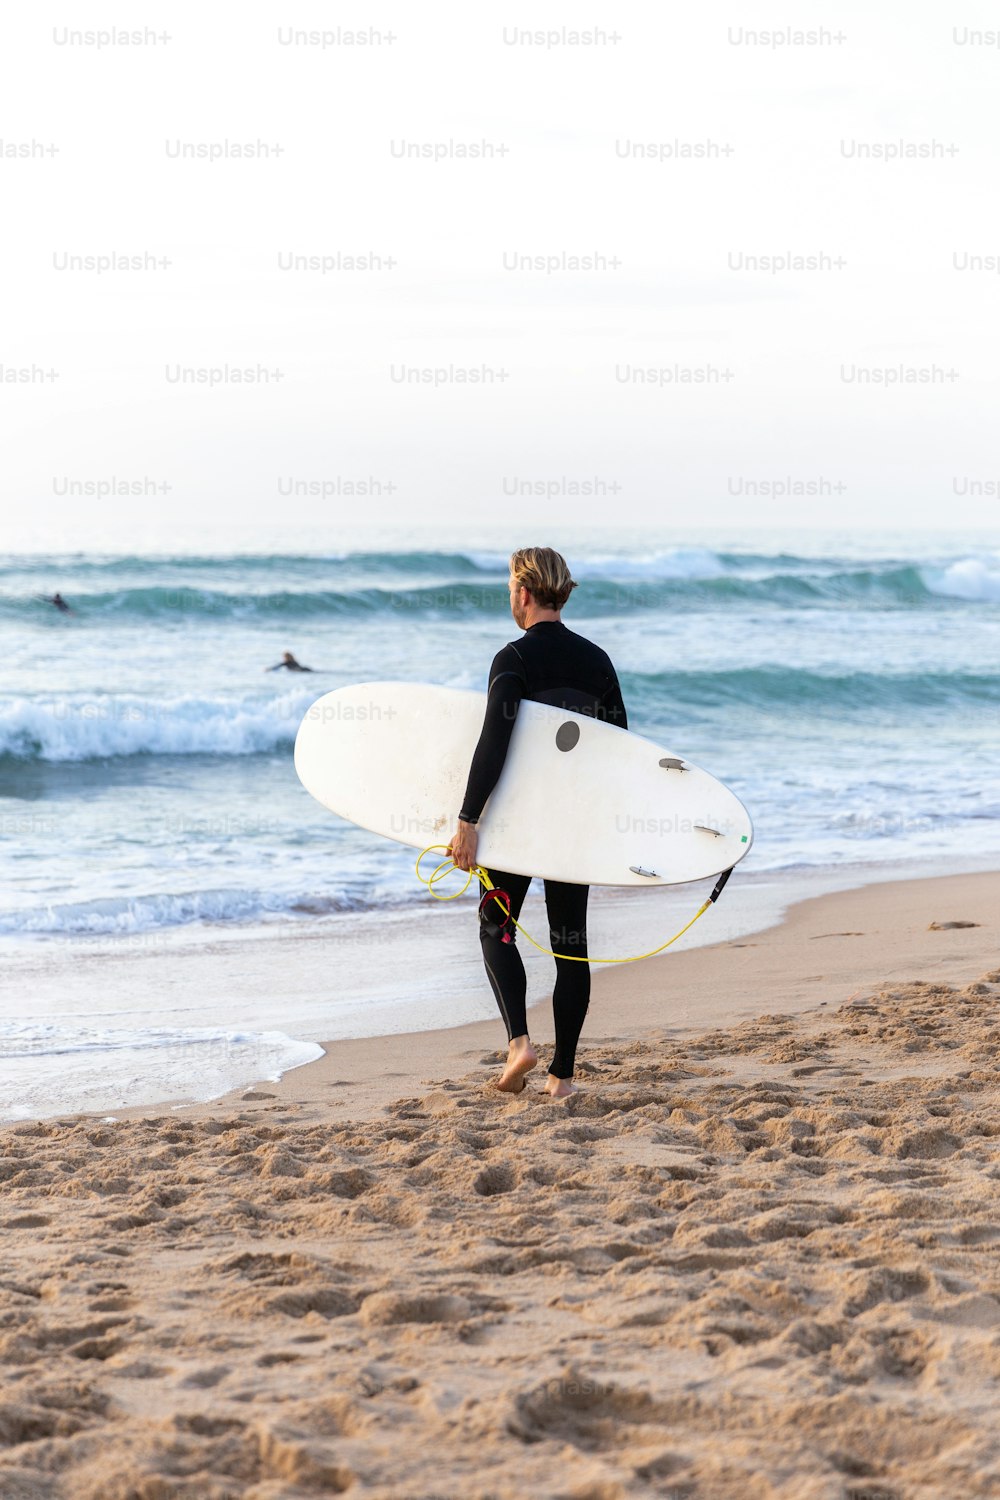 a man in a wet suit carrying a surfboard on a beach